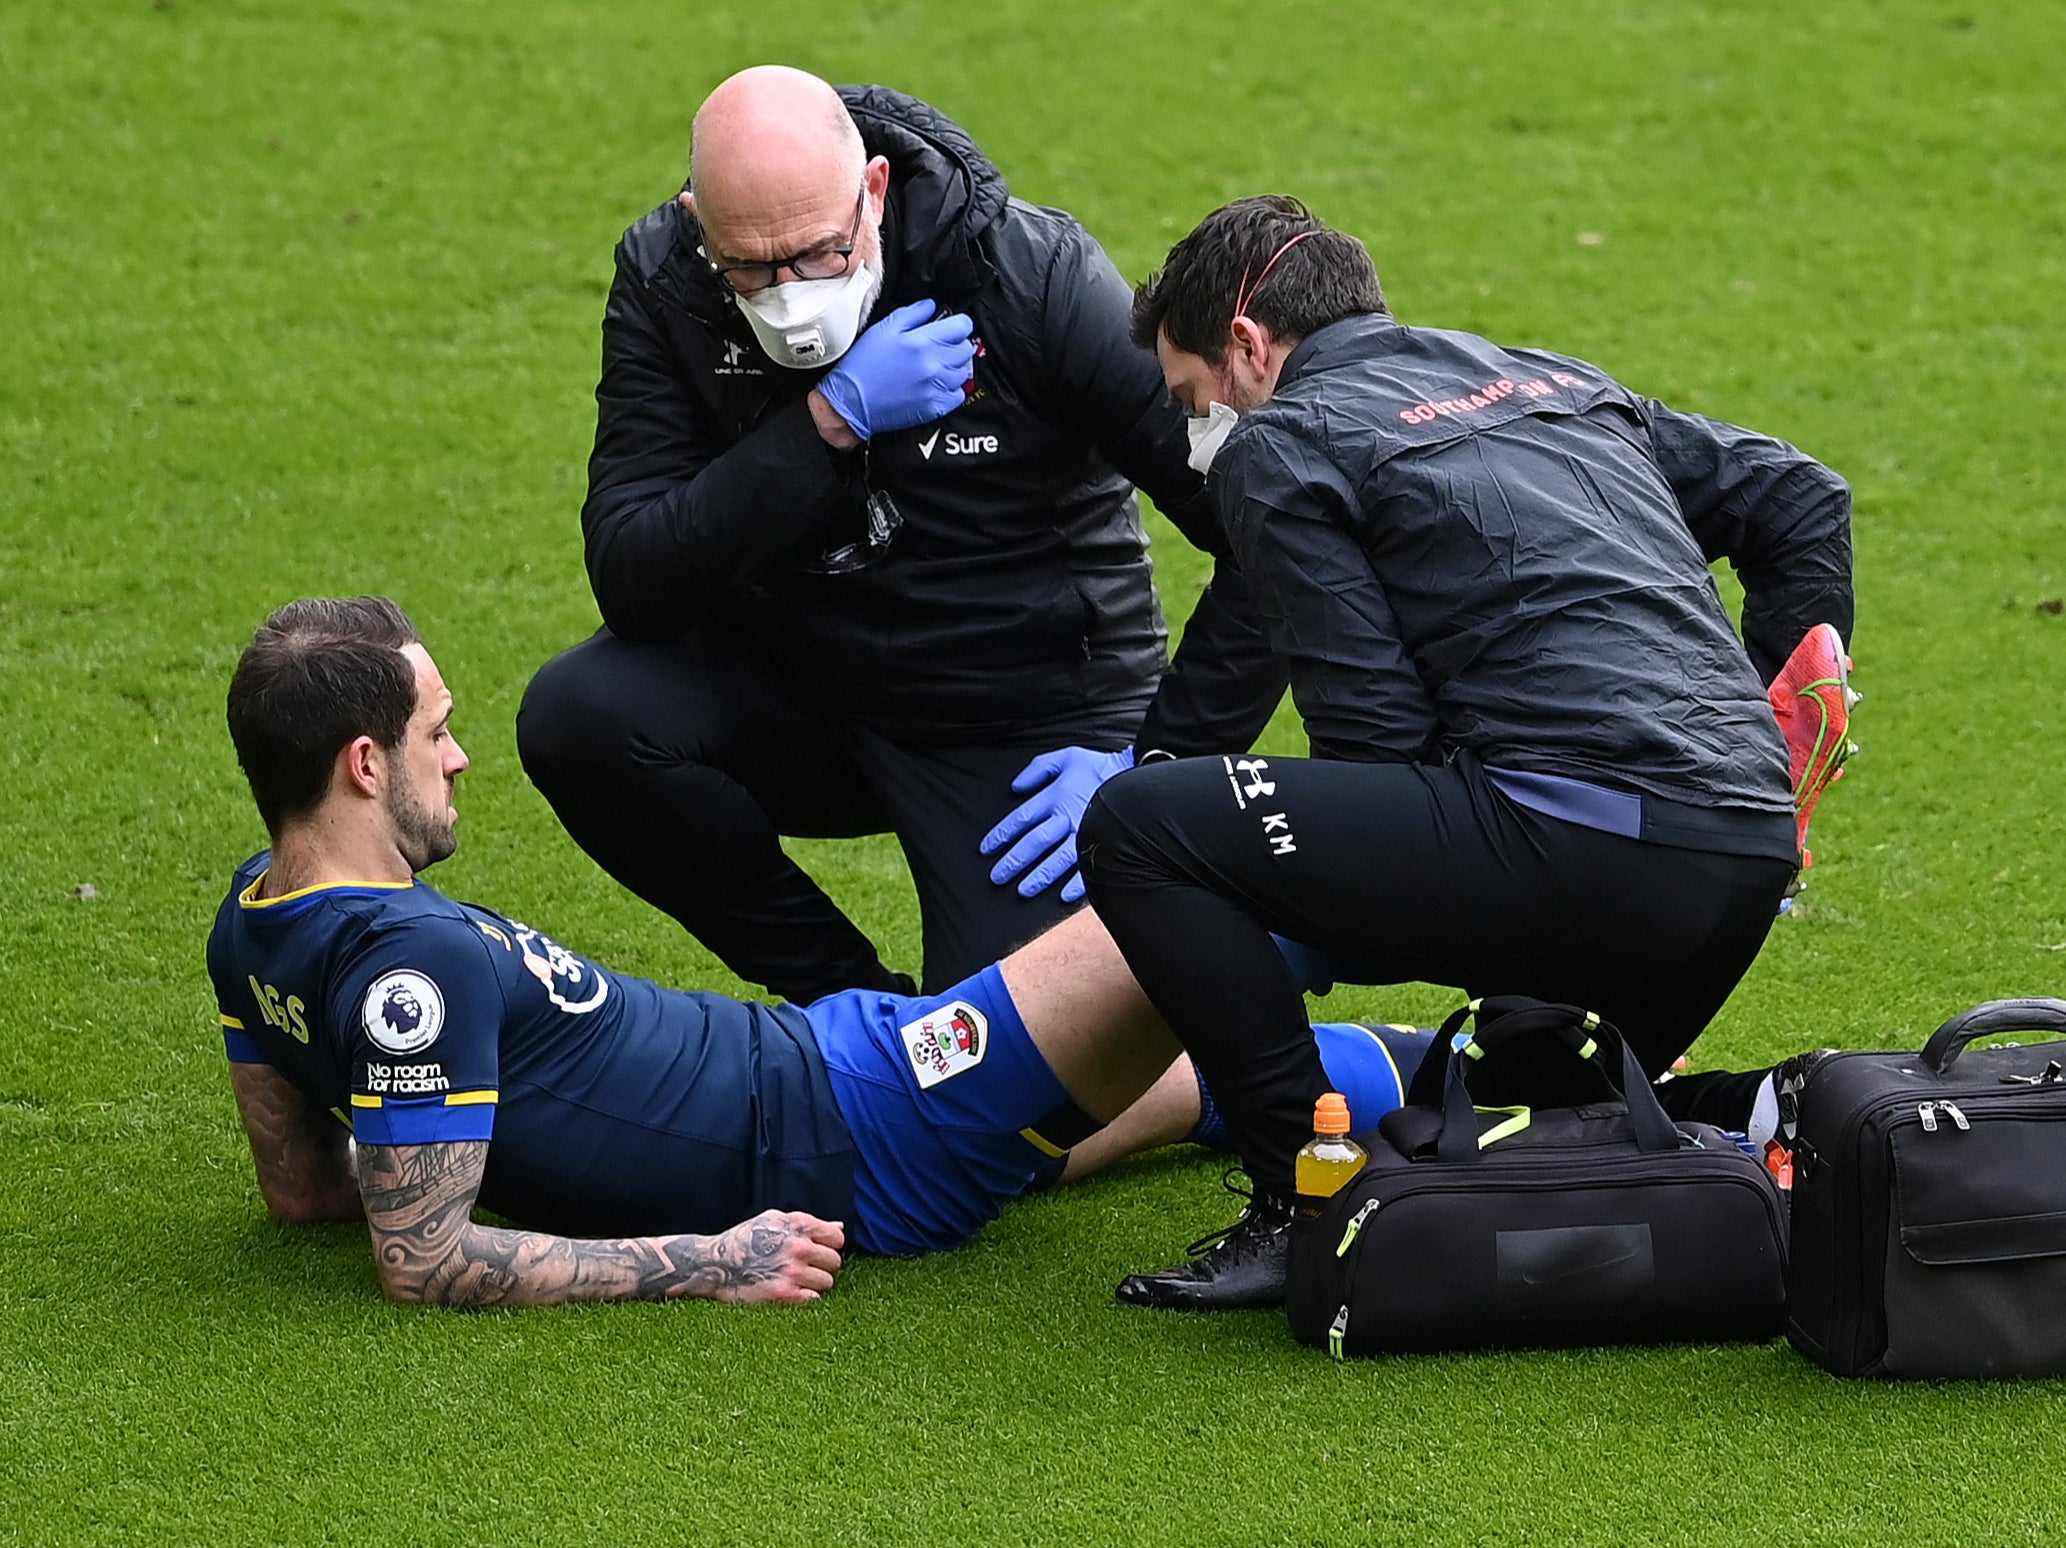 Southampton striker Danny Ings has suffered another injury setback